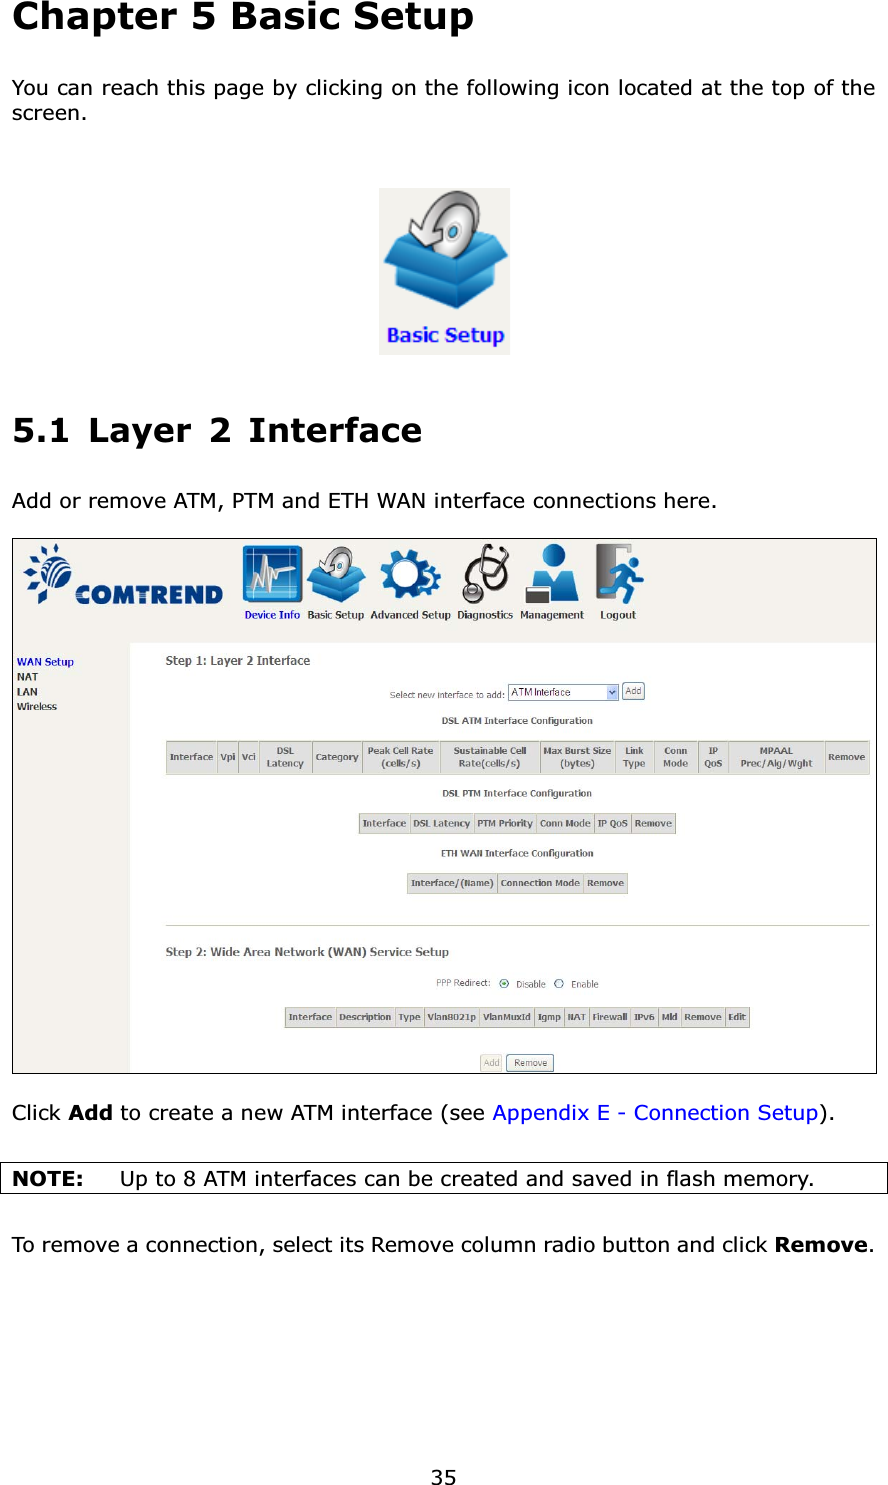 35Chapter 5 Basic SetupYou can reach this page by clicking on the following icon located at the top of the screen.5.1 Layer 2 InterfaceAdd or remove ATM, PTM and ETH WAN interface connections here.Click Add to create a new ATM interface (see Appendix E - Connection Setup).NOTE: Up to 8 ATM interfaces can be created and saved in flash memory.To remove a connection, select its Remove column radio button and click Remove.